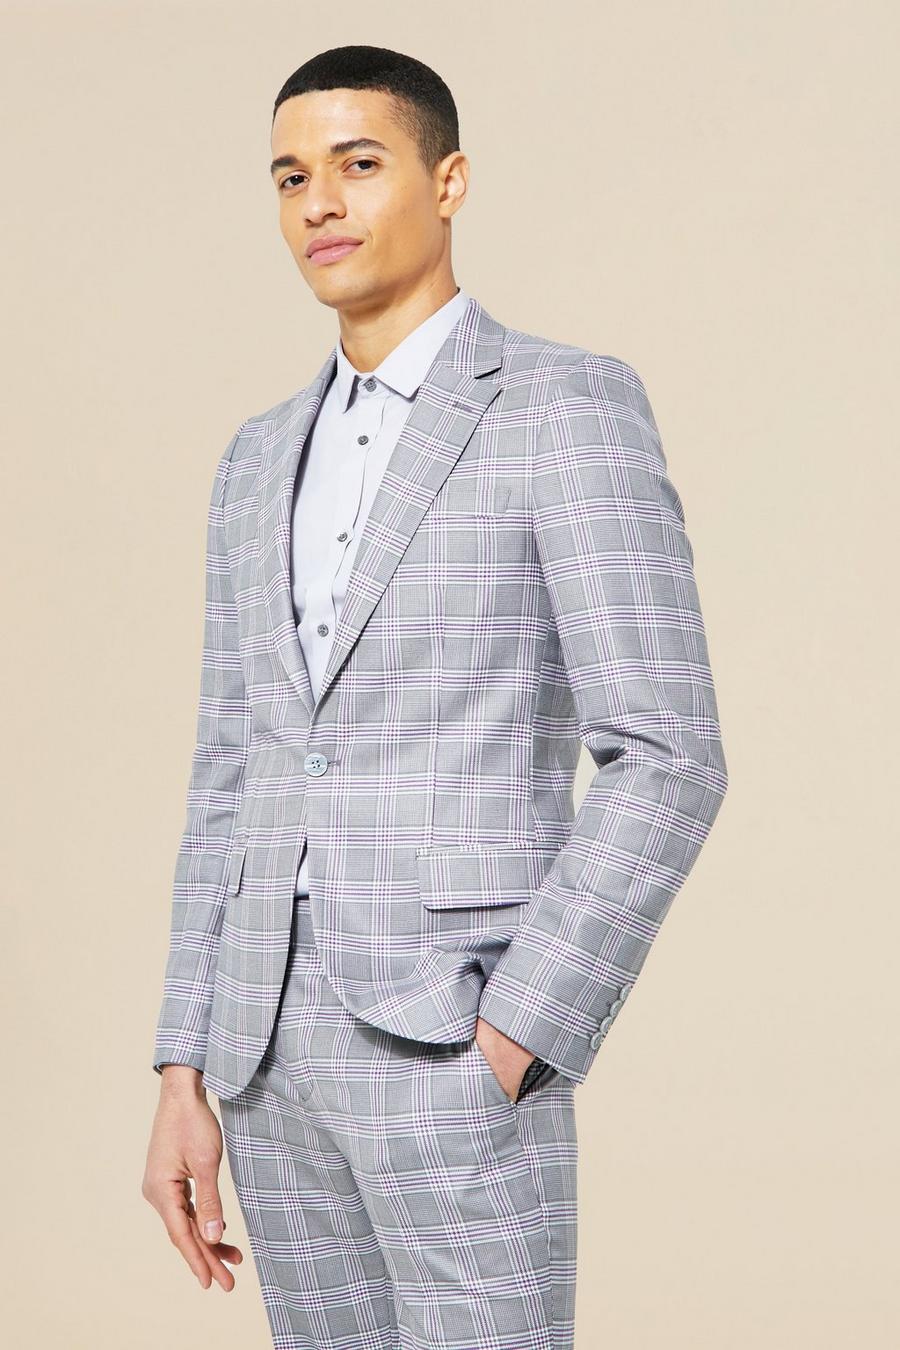 Grey Single Breasted Skinny Check Suit Jacket